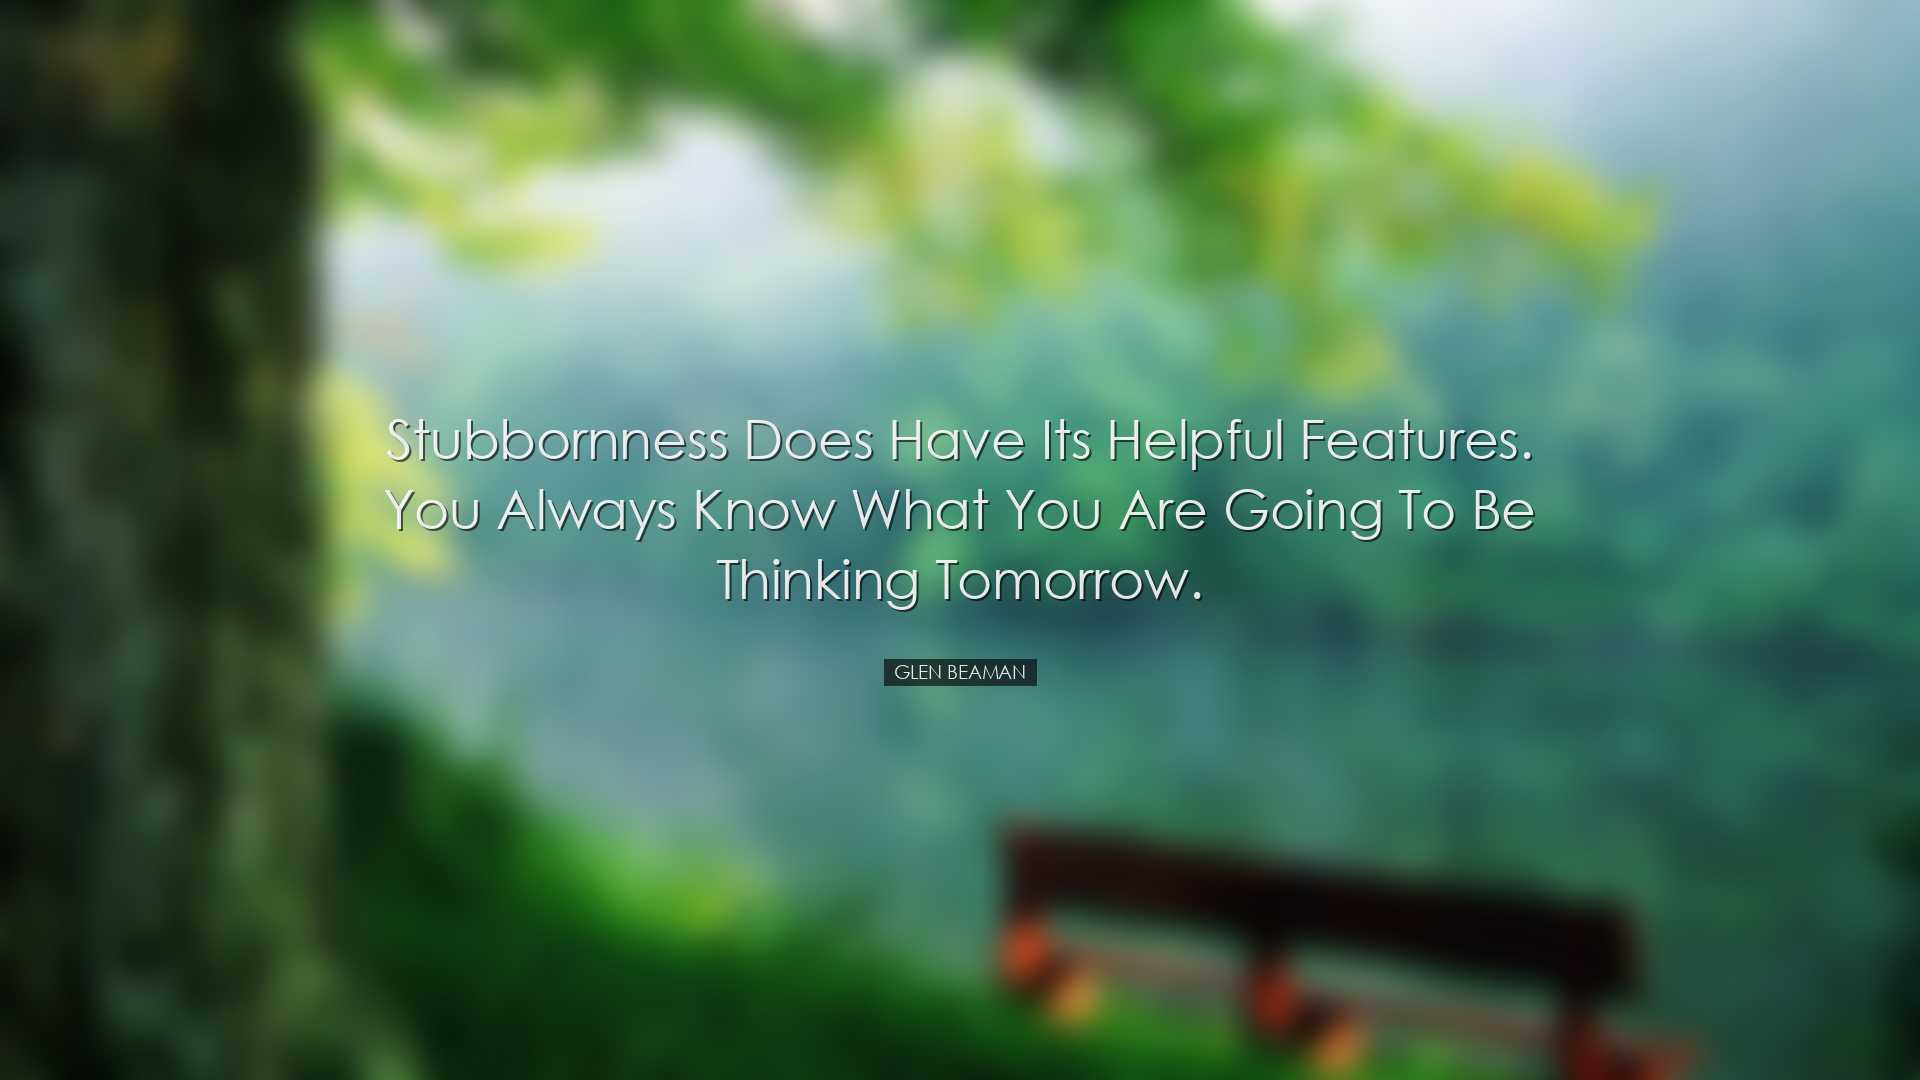 Stubbornness does have its helpful features. You always know what